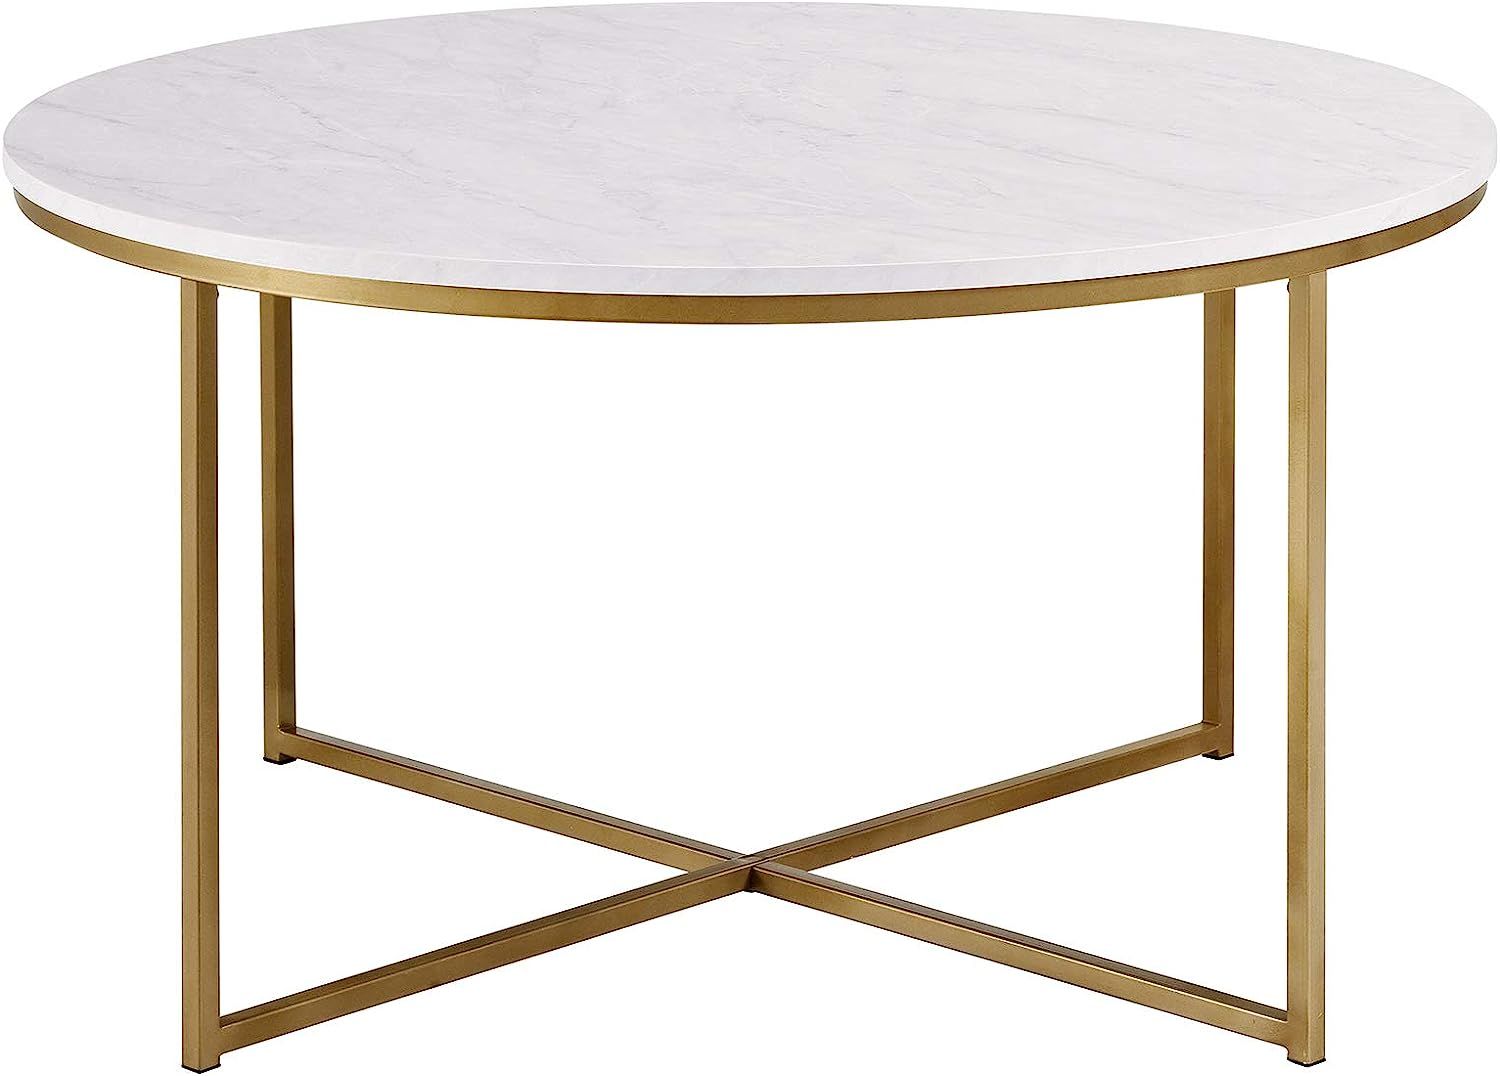 Walker Edison Cora Modern Round Faux Marble Top Coffee Table with X Base, 36 Inch, White Faux Mar... | Amazon (US)